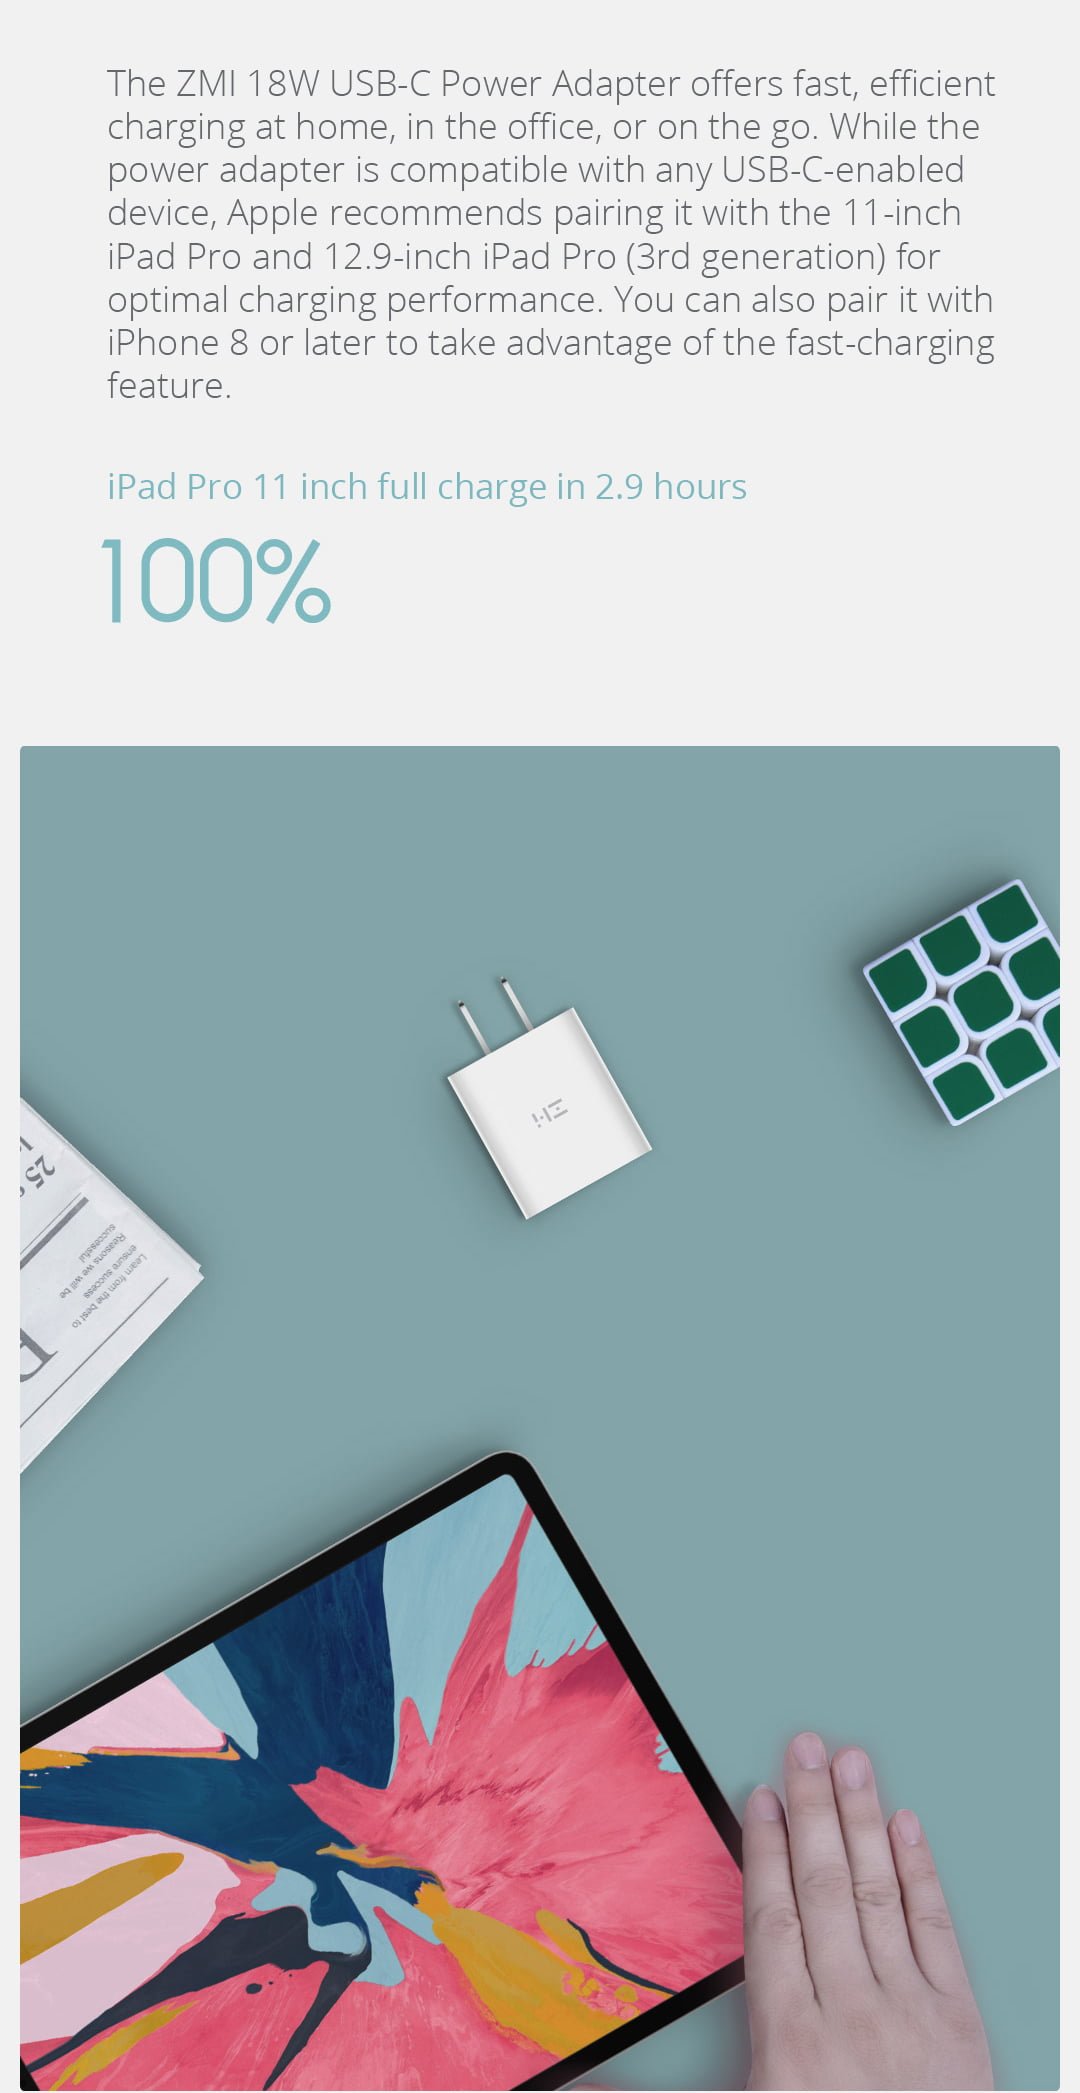 The ZMI 18W USB‑C Power Adapter offers fast, efficient charging at home, in the office, or on the go. While the power adapter is compatible with any USB‑C-enabled device, Apple recommends pairing it with the 11-inch iPad Pro and 12.9-inch iPad Pro (3rd generation) for optimal charging performance. You can also pair it with iPhone 8 or later to take advantage of the fast-charging feature.